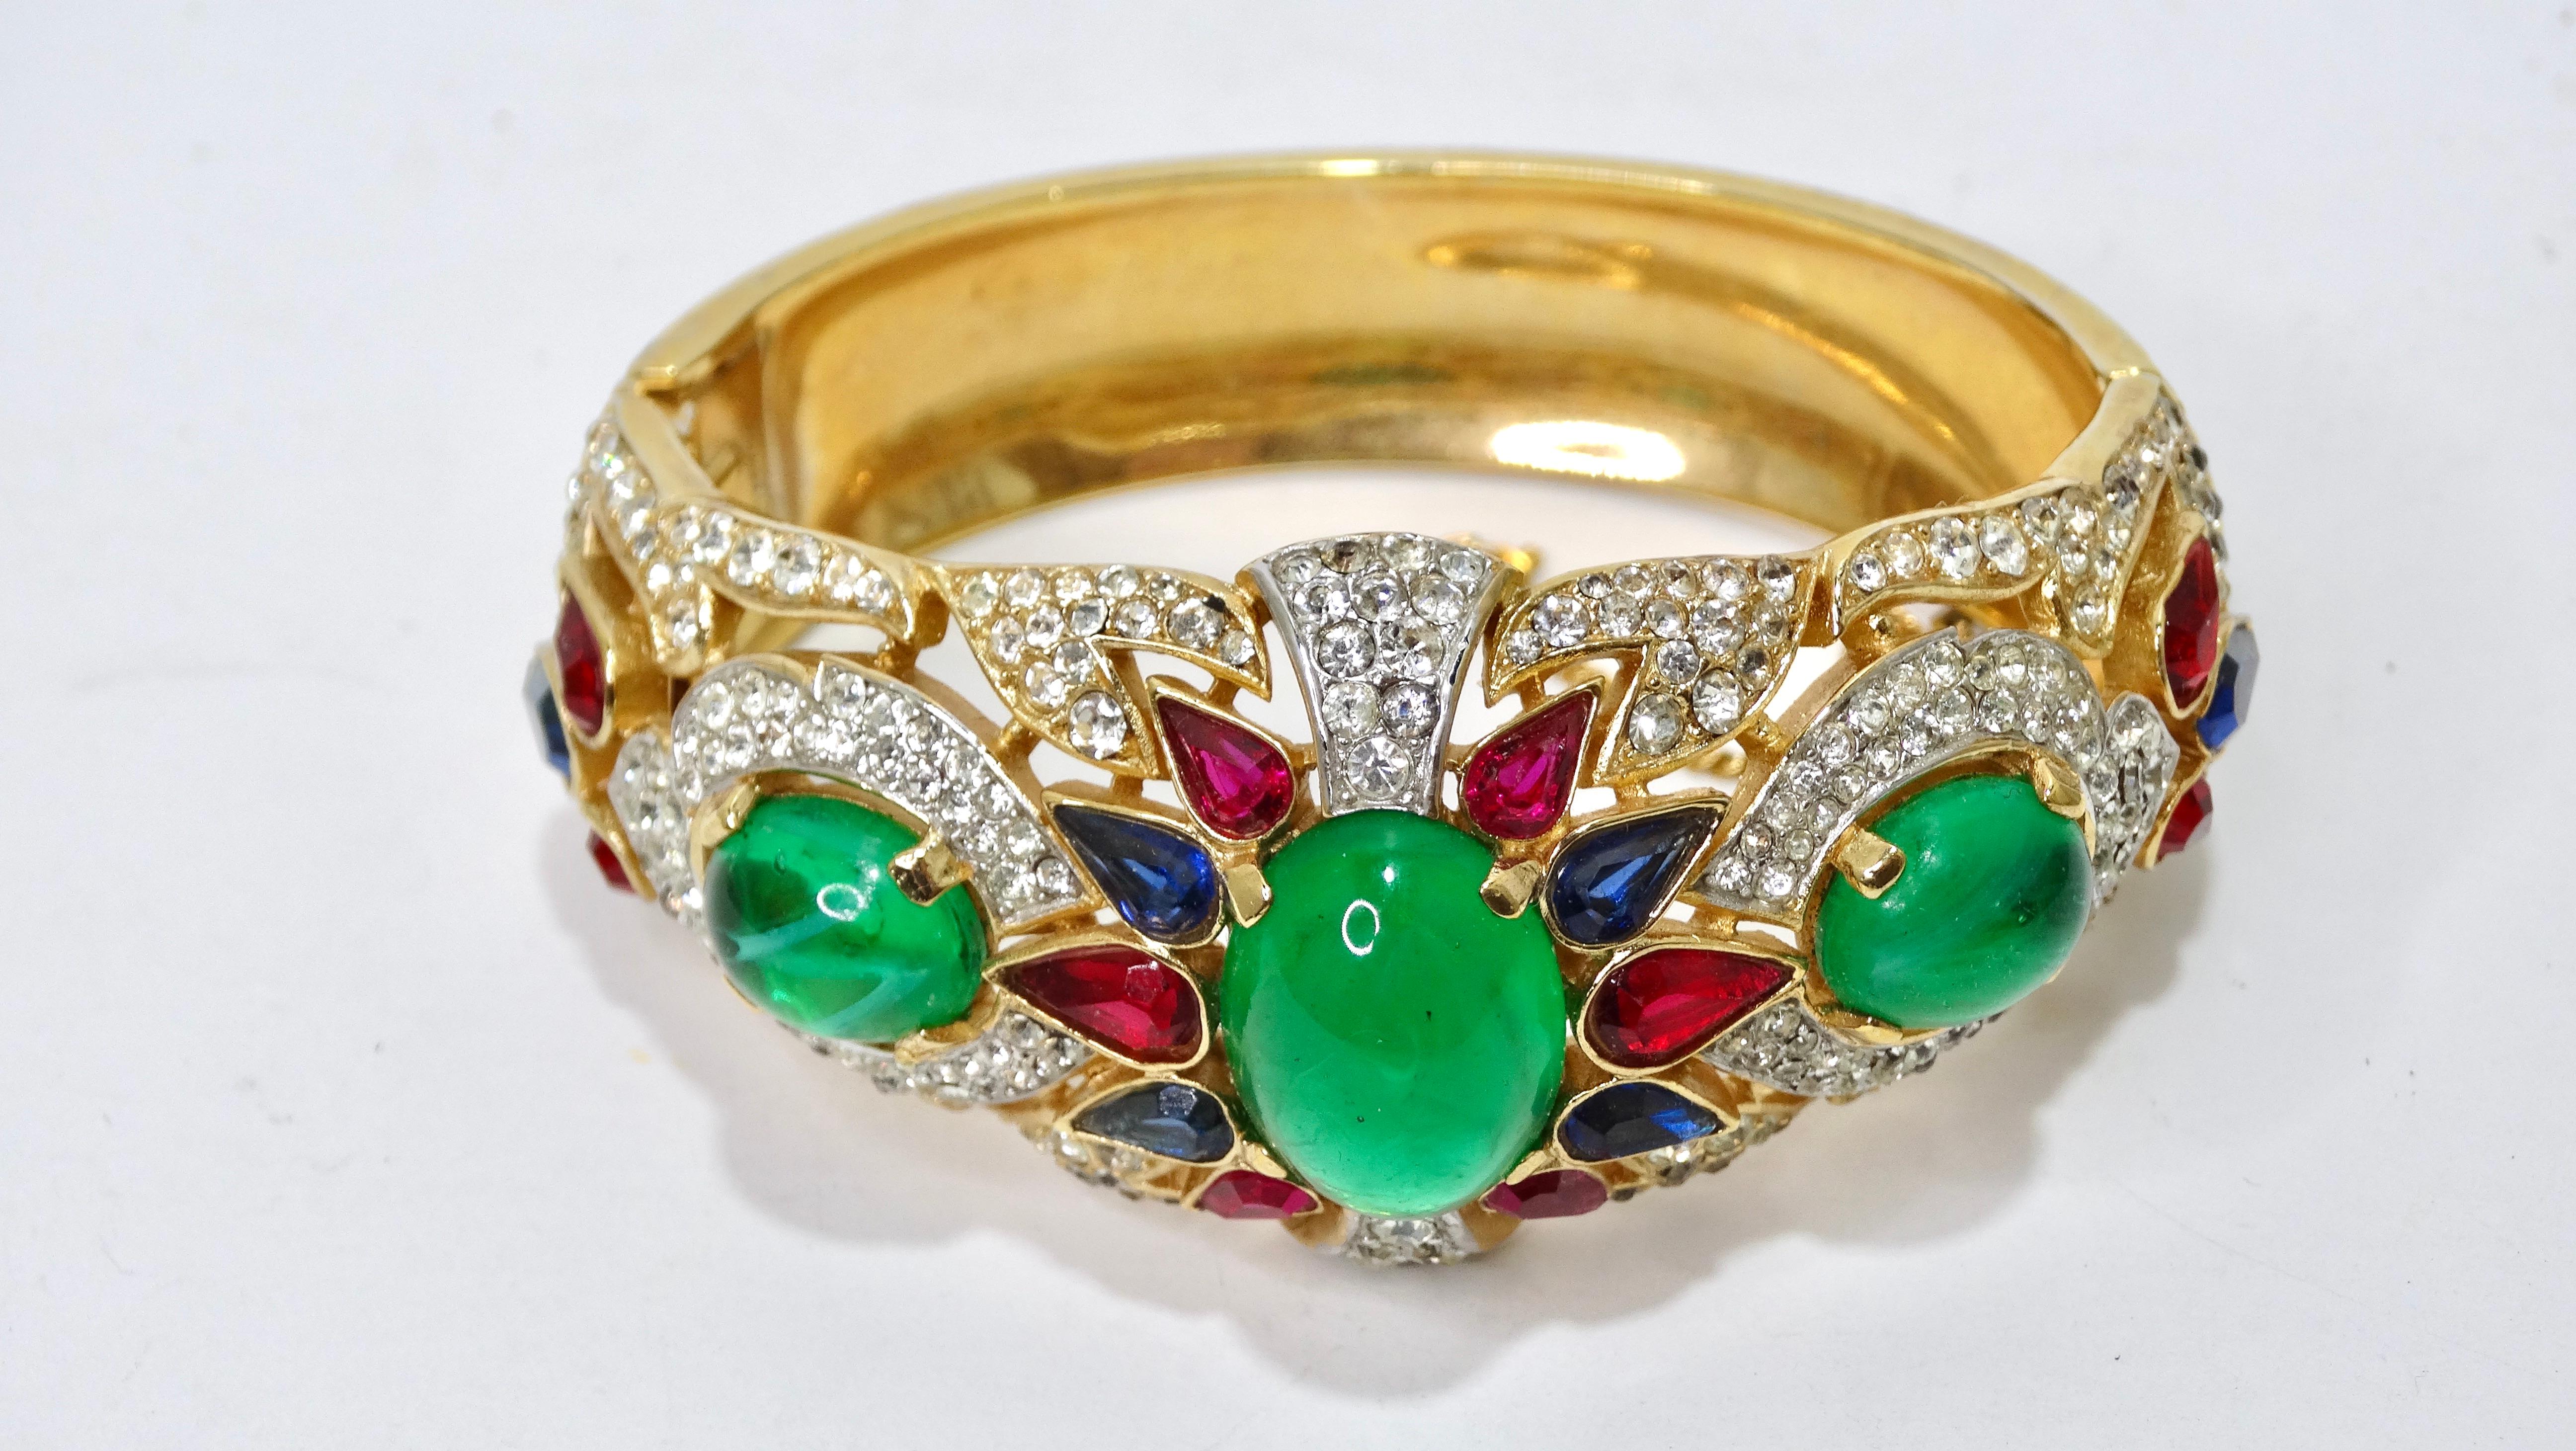 This is a beautiful Trifari bracelet that is completely covered in beautiful faux gemstones. It features three large emerald green stones surrounded by pave clear crystals. This bracelet is bound to create a statement. For your next event, pair it